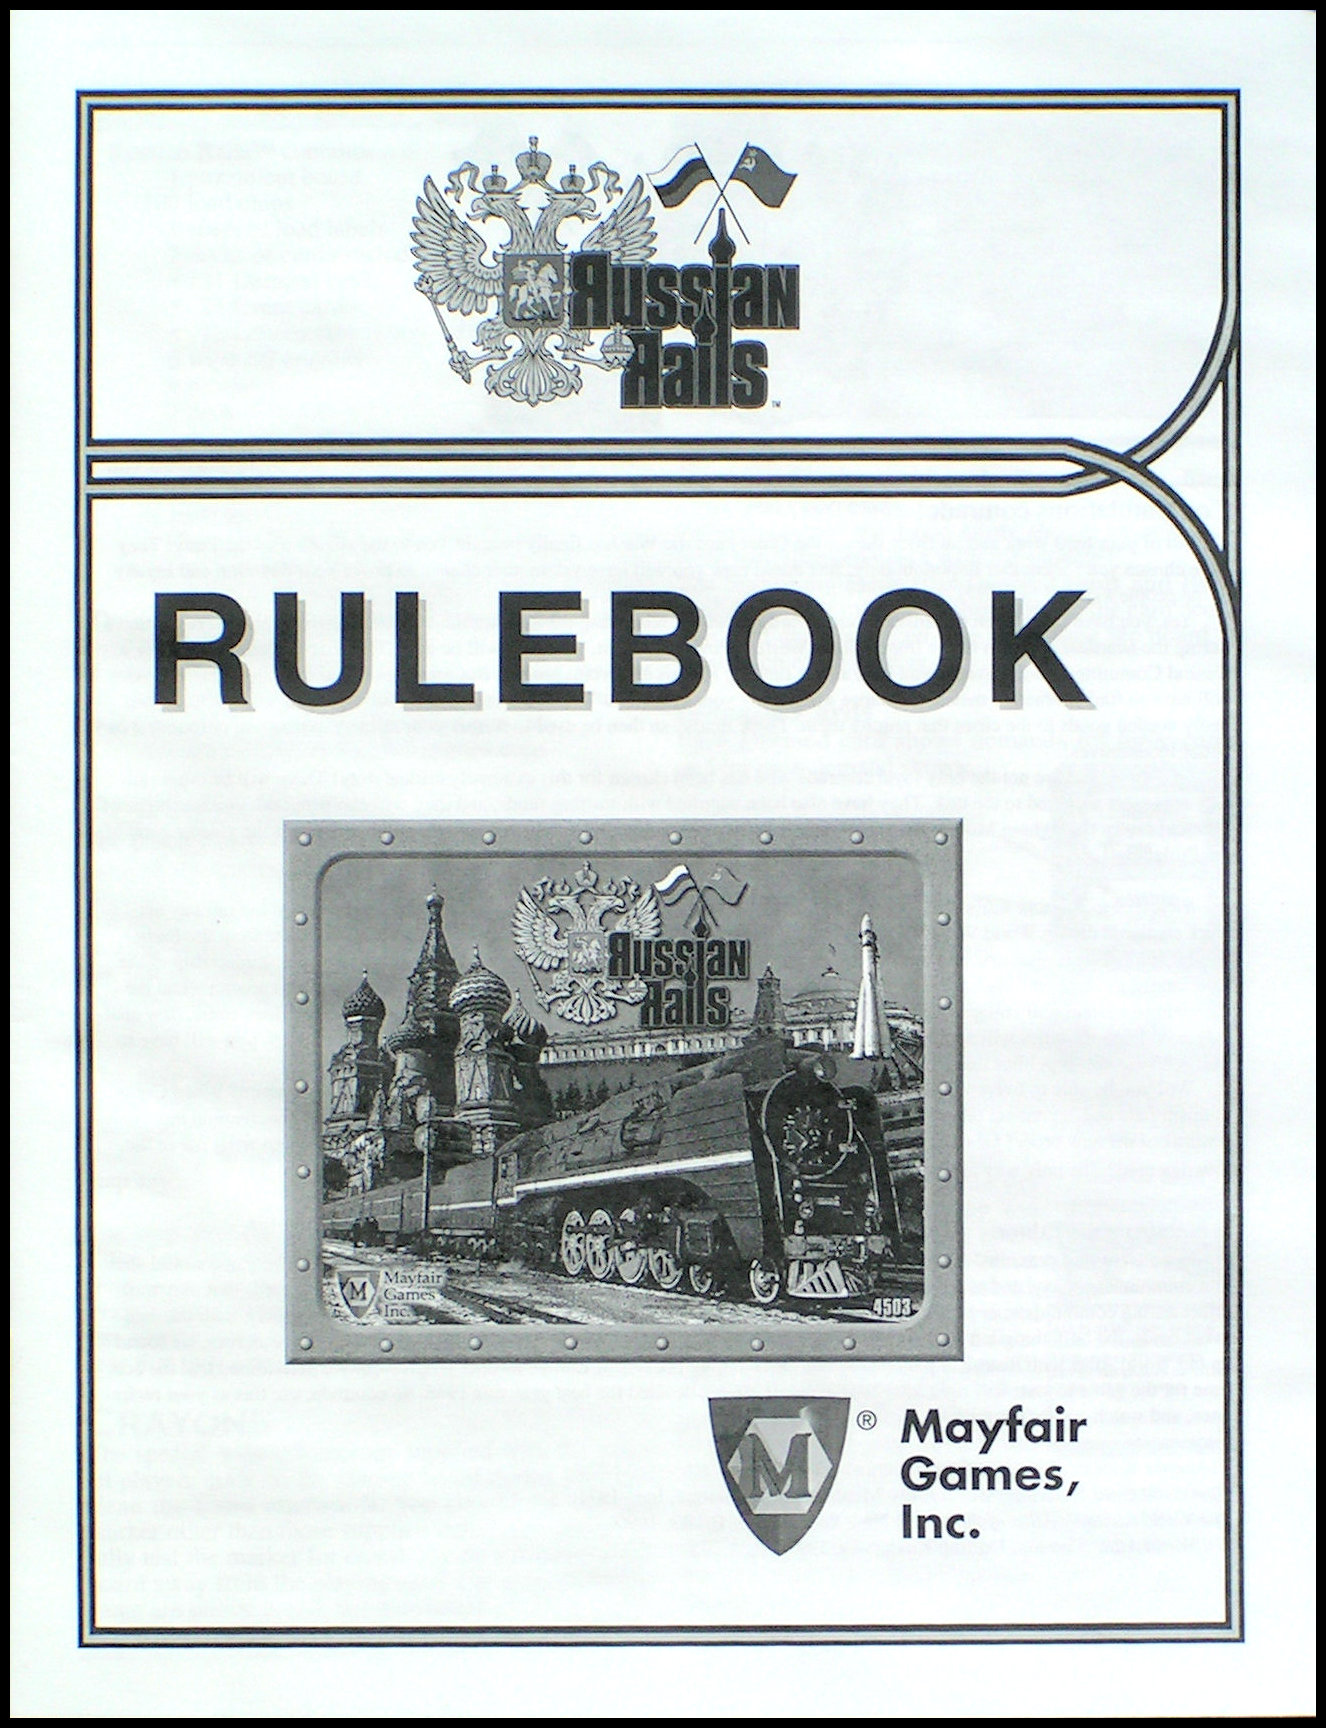 Russian Rails - Rulebook Front